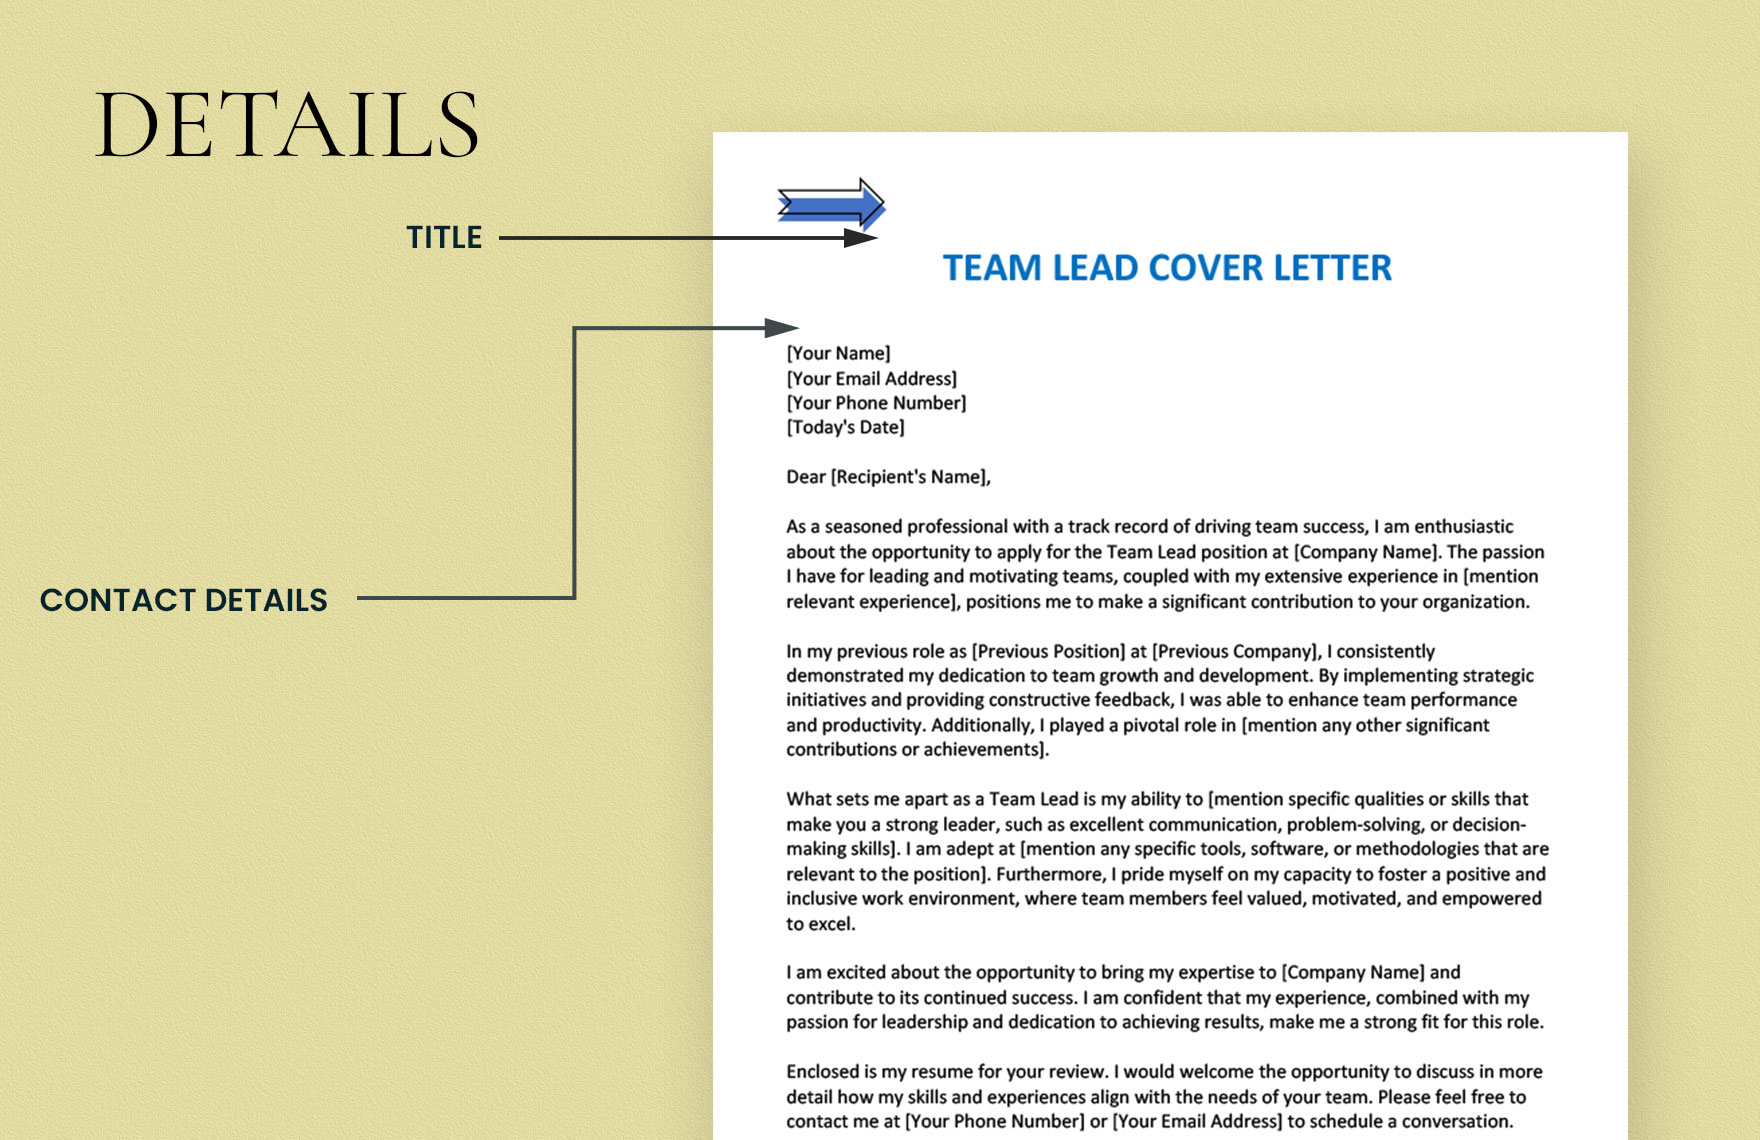 Team Lead Cover Letter